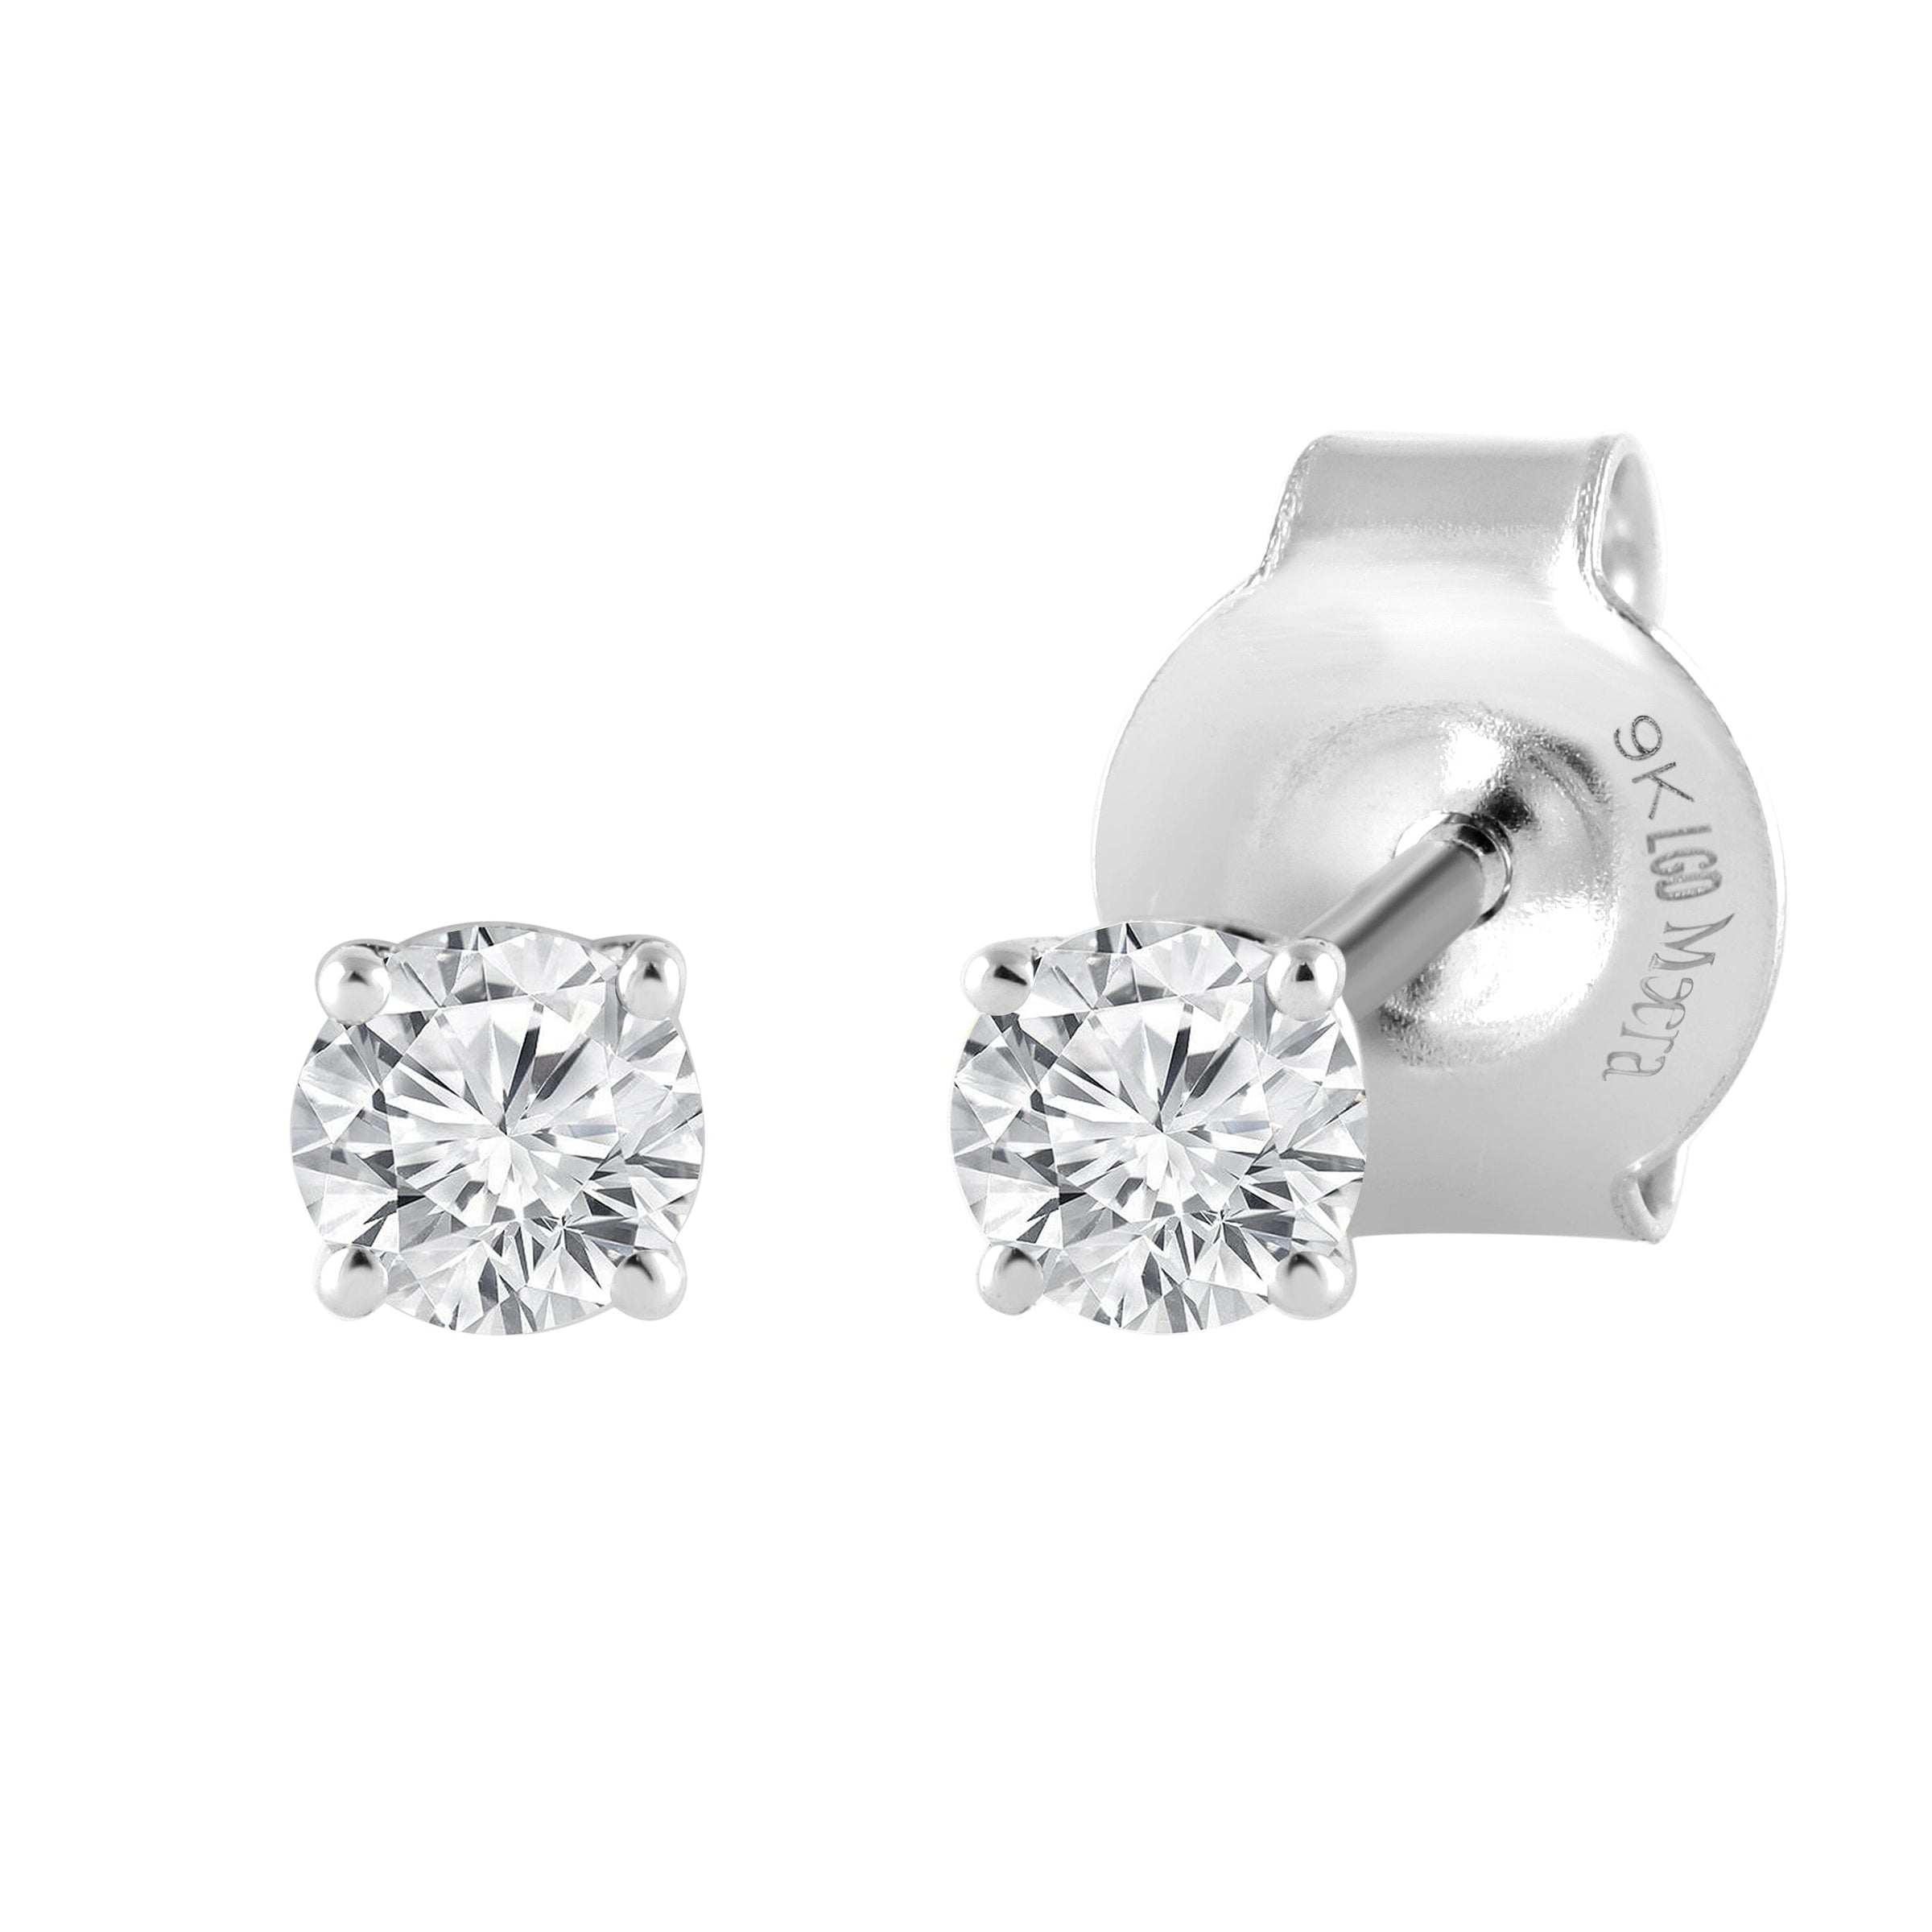 Meera Solitaire Earrings with 1/5ct of Laboratory Grown Diamonds in 9ct White Gold Earrings Bevilles 